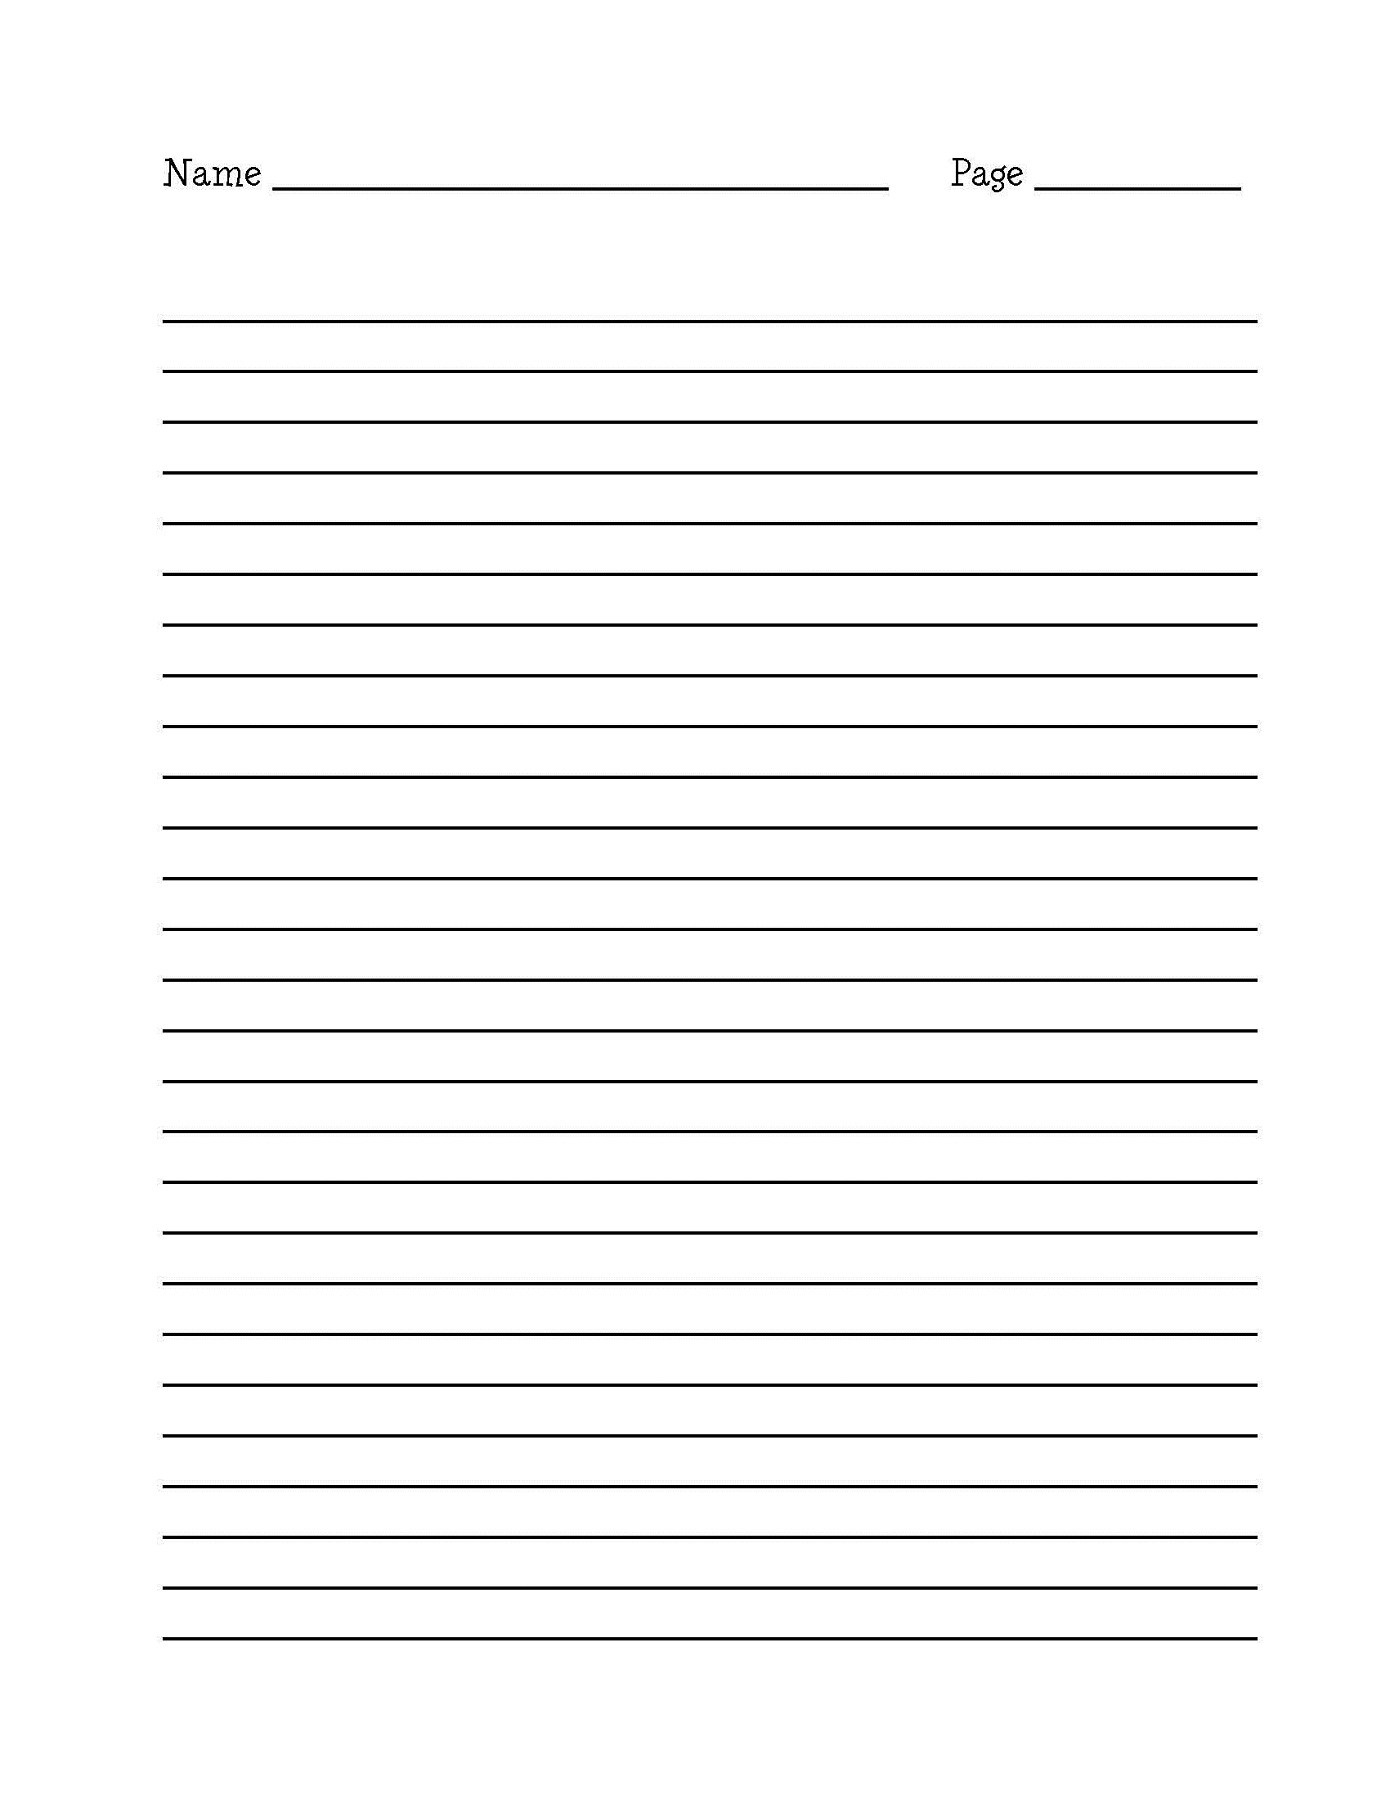 Free Printable Lined Handwriting Paper – Ezzy - Free Printable Lined Handwriting Paper